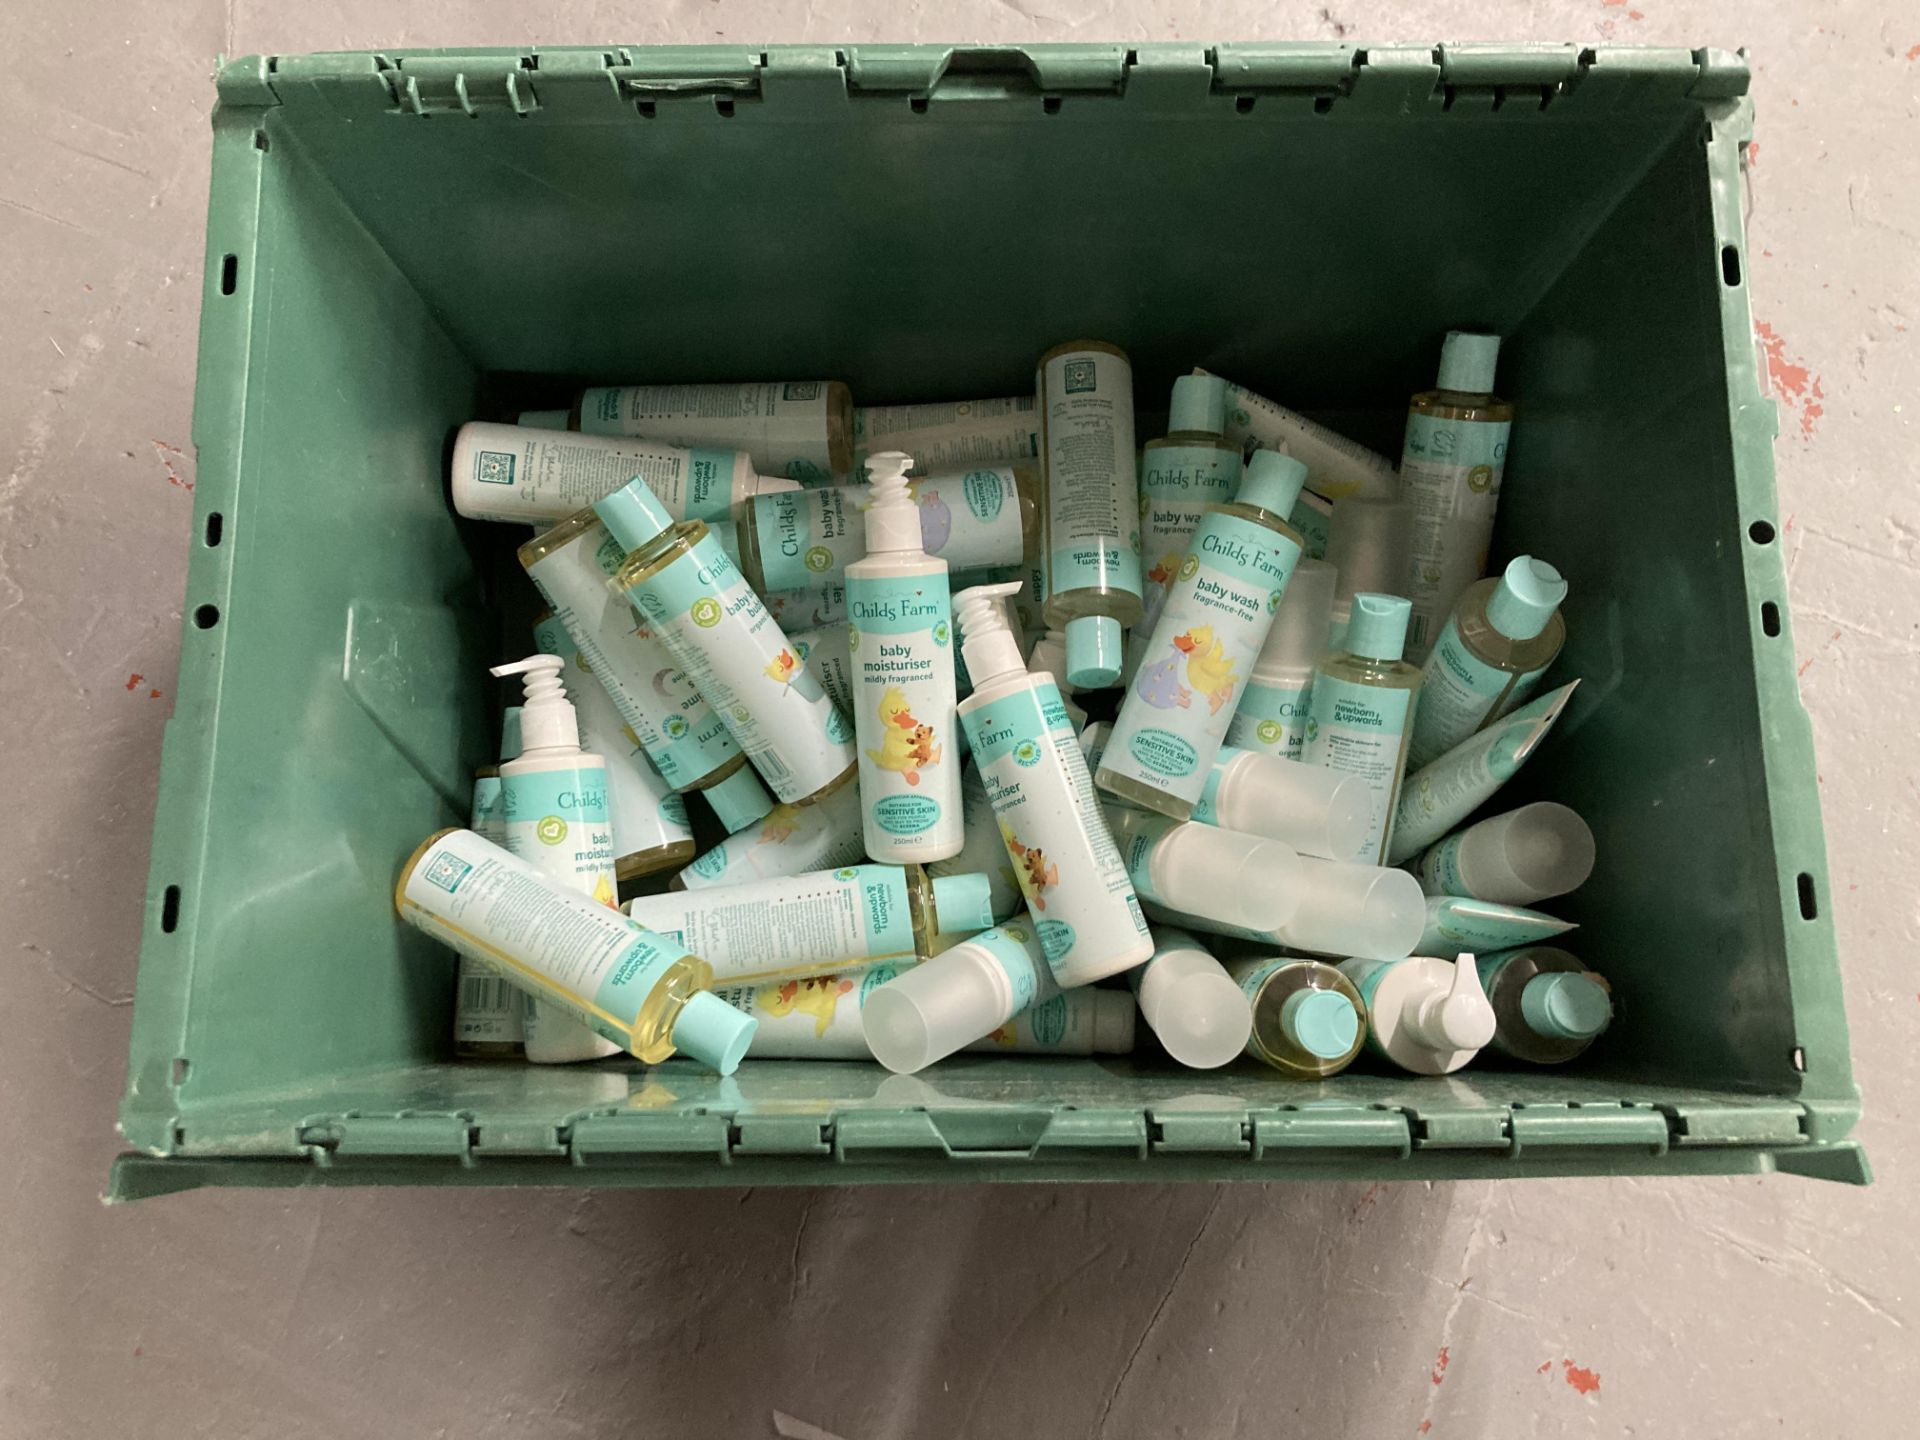 A crate of Child's Farm skin range items - Baby oil,